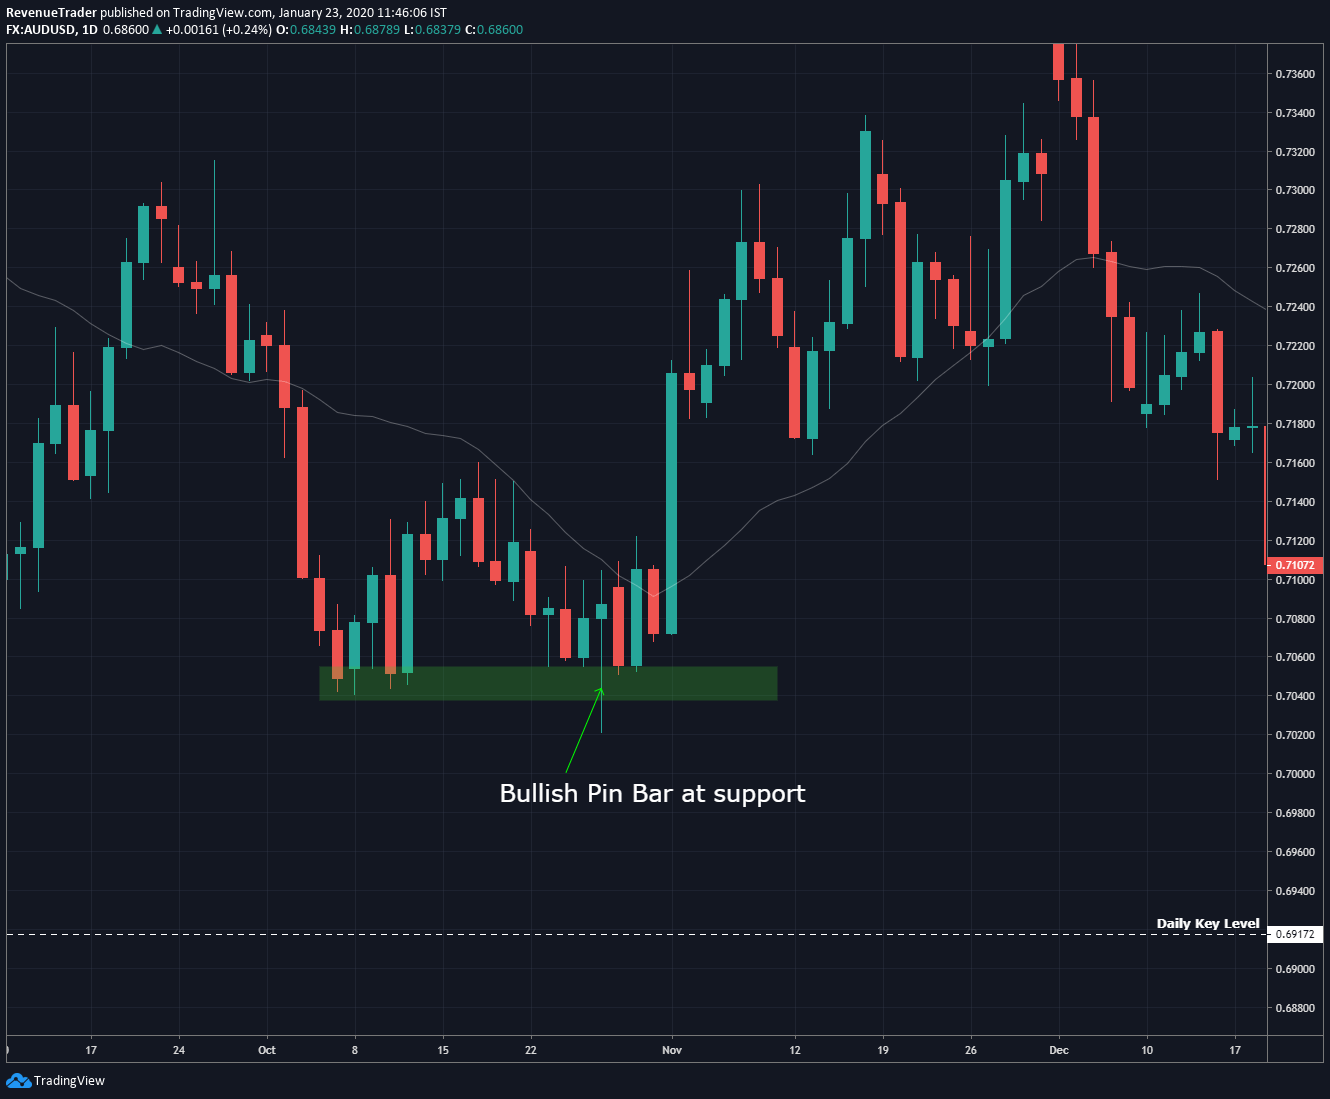 bullish pin bar reject the support and price start to reverse